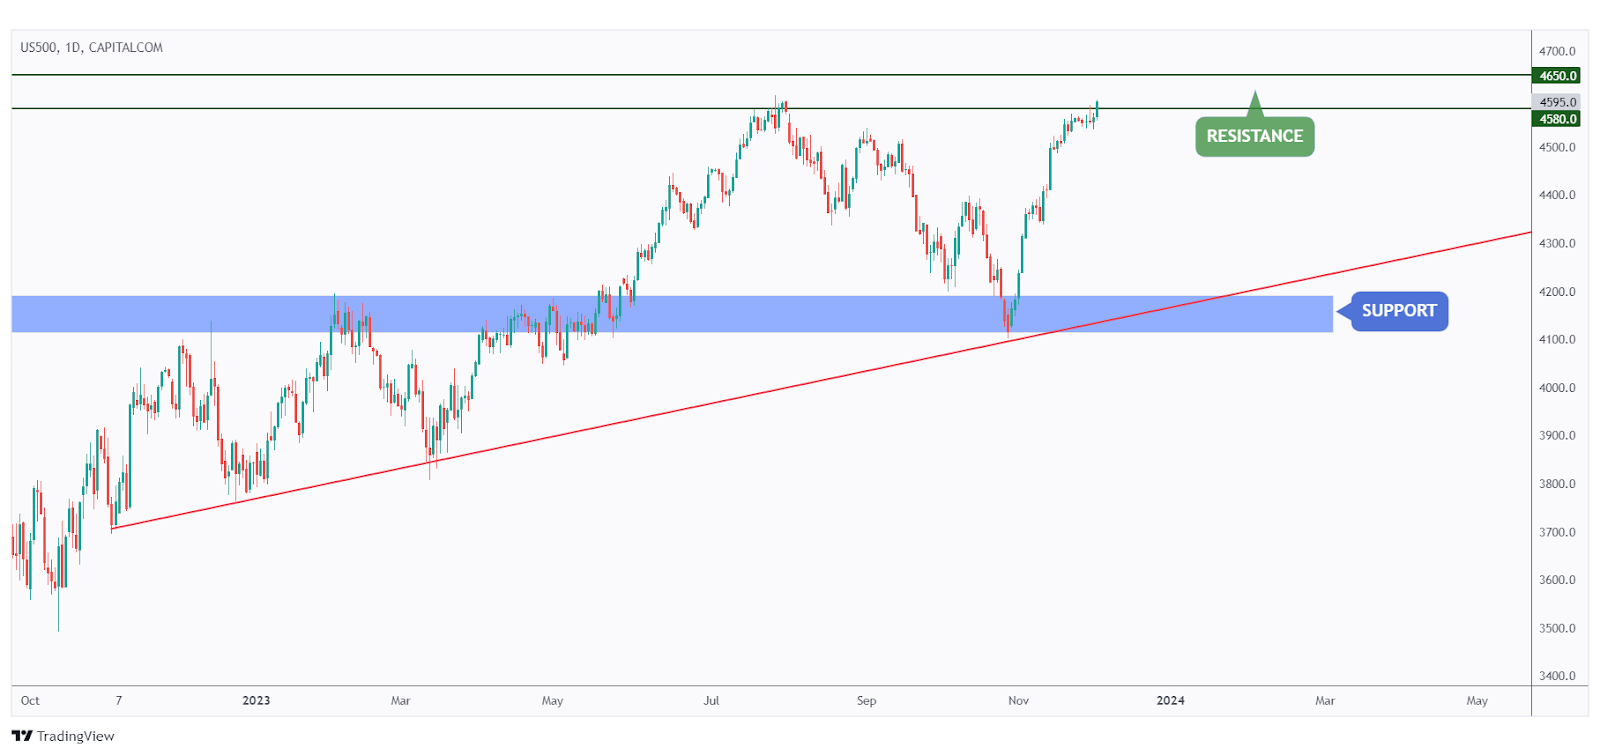 Technical Analysis of US500